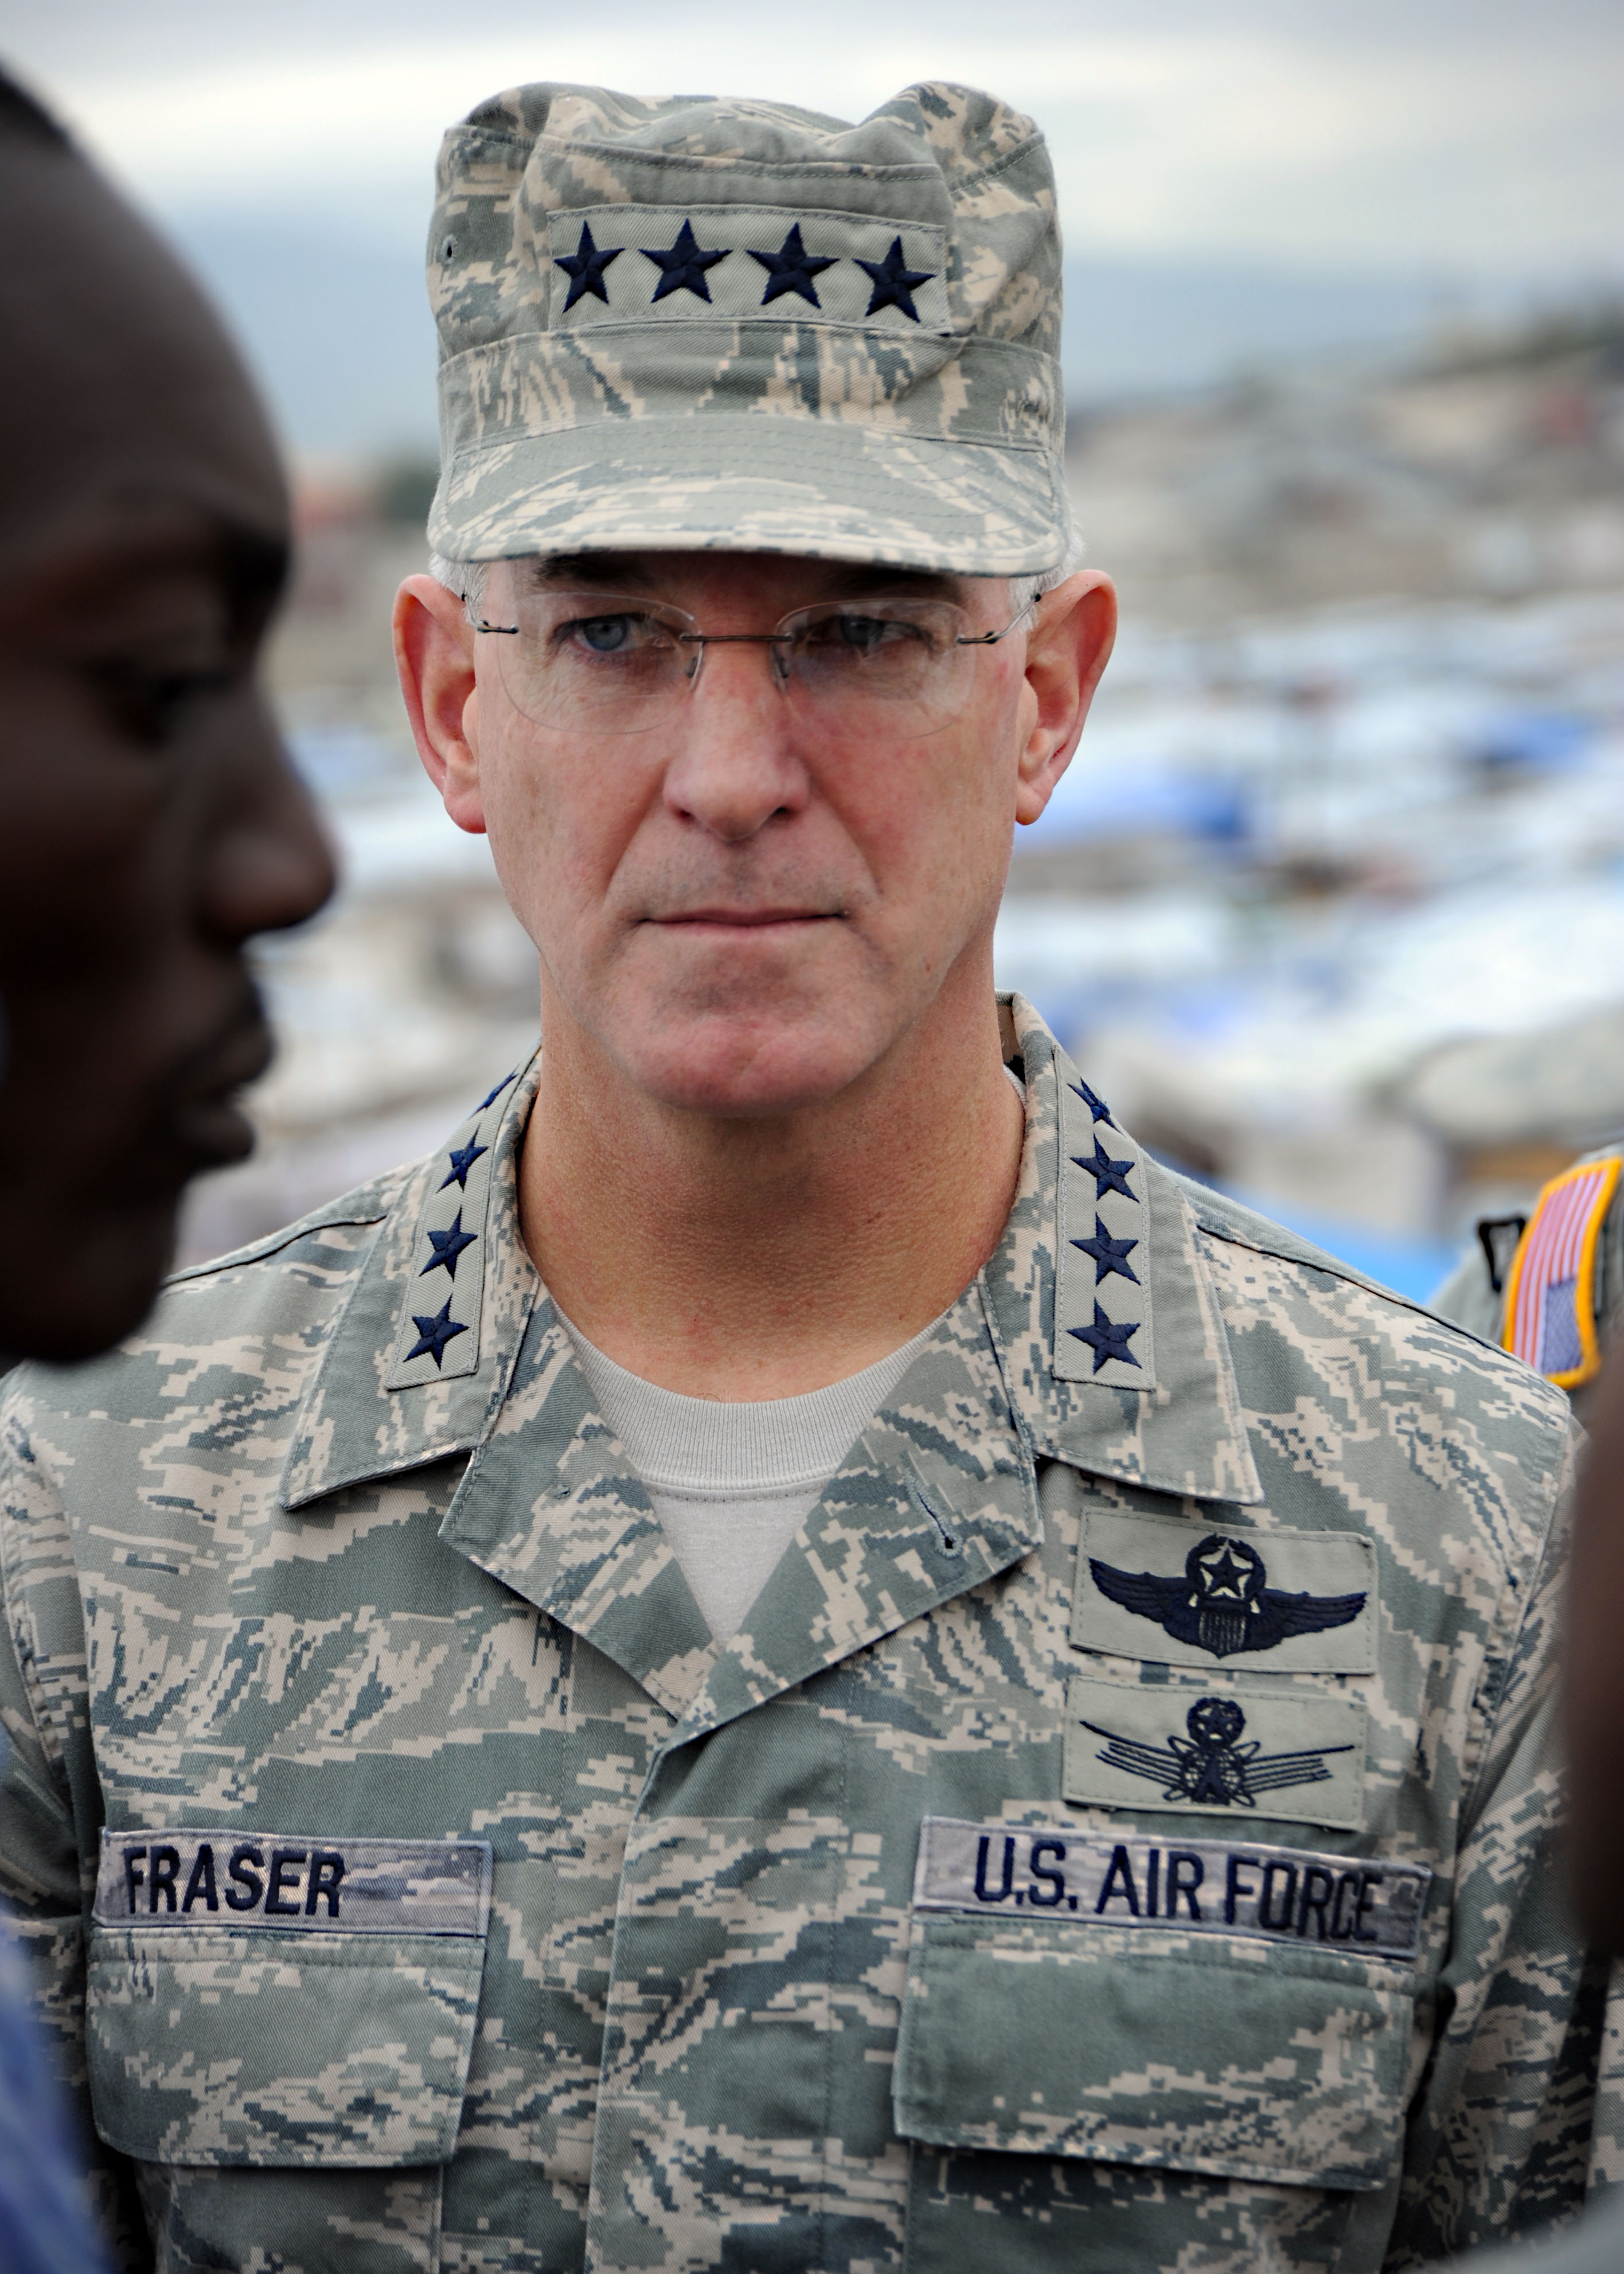 Douglas M. Fraser on X: "Air Force Gen. Douglas Fraser, commander of U.S.  Southern Command, listens to a camp leader at Ancien Aeroport Militaire in  Port-au-Prince, Haiti, March 6, 2010 https://t.co/7gIYRVMRZO" /